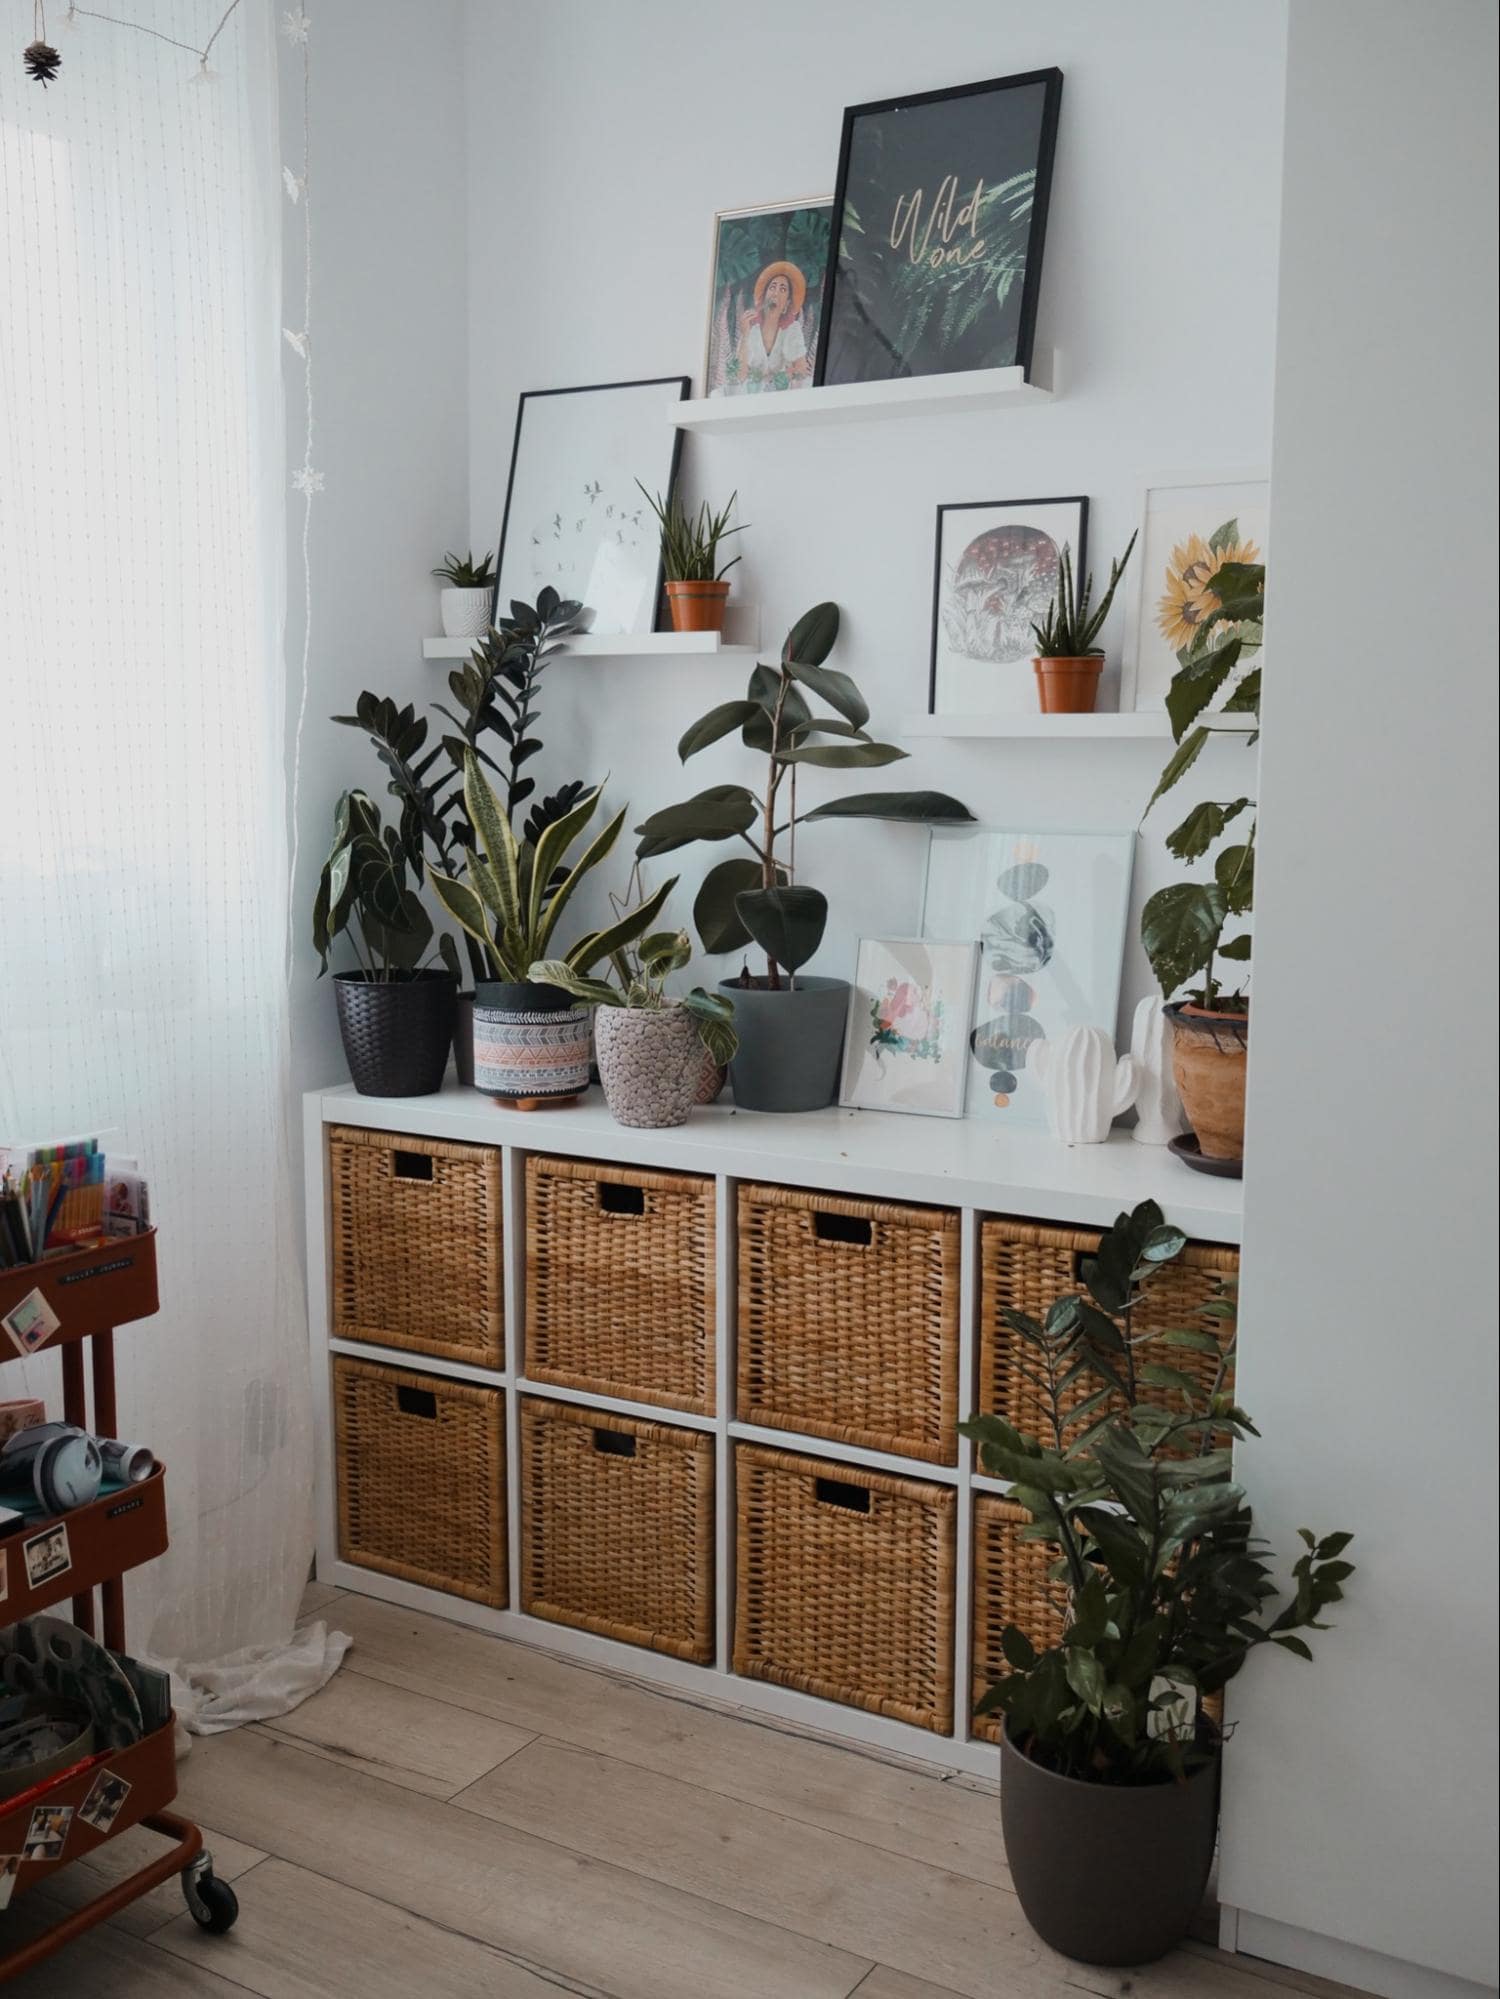 A collection of house plants, including the Snake plant, Zamioculcas, and Rubber Tree